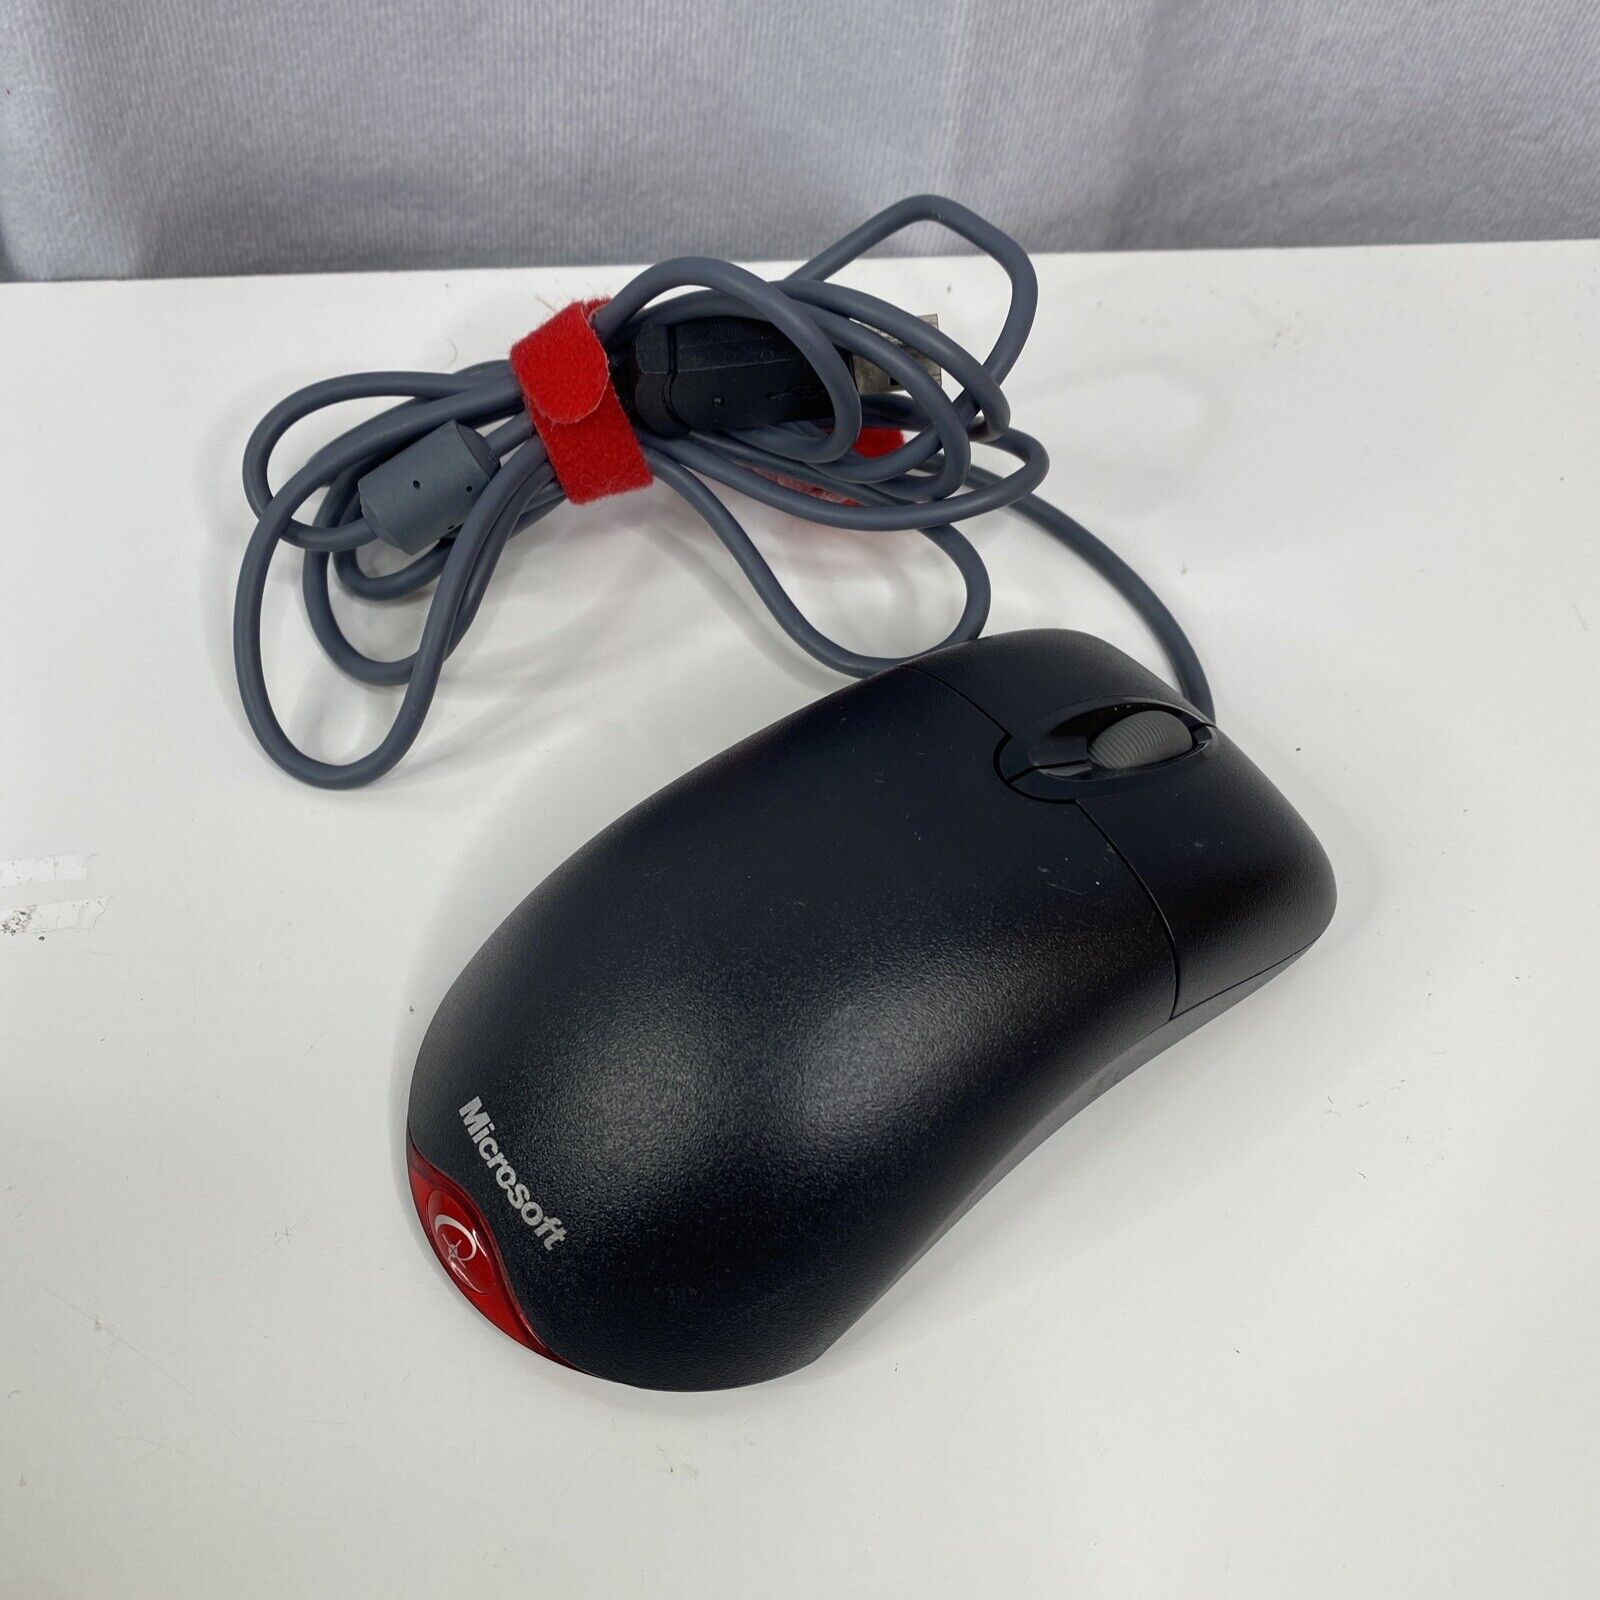 Vintage Black Microsoft Wheel Mouse Optical USB Mouse 1.1/1.1a - CLEANED TESTED